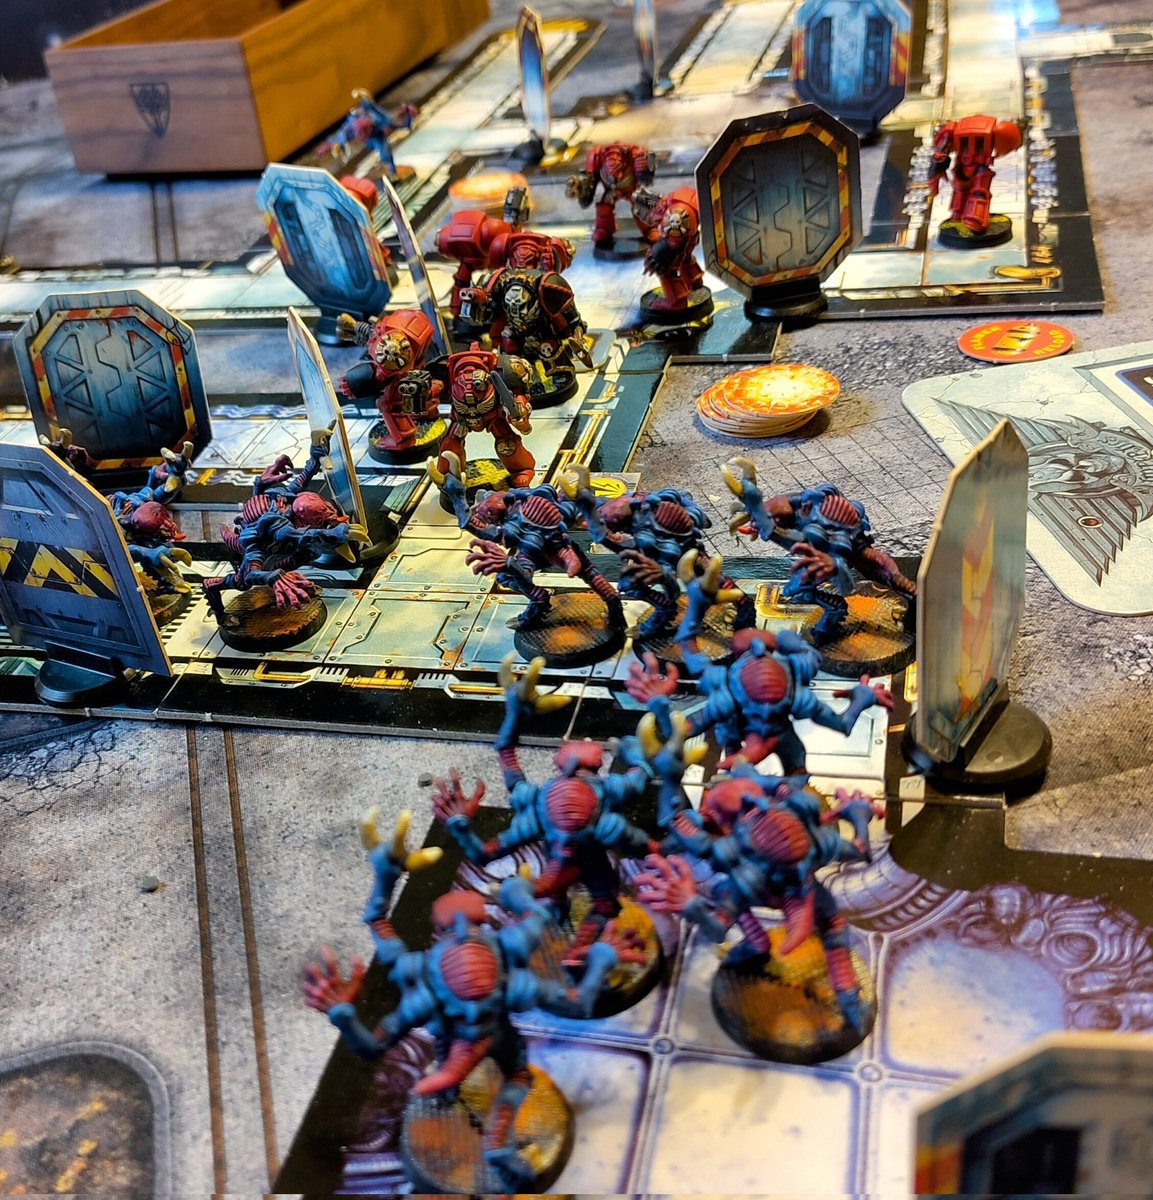 Had the chance to play with my painted Space Hulk minis last weekend and it did not disappoint. Genestealers successfully defended the craft from the Blood Angels. #oldhammer #40k